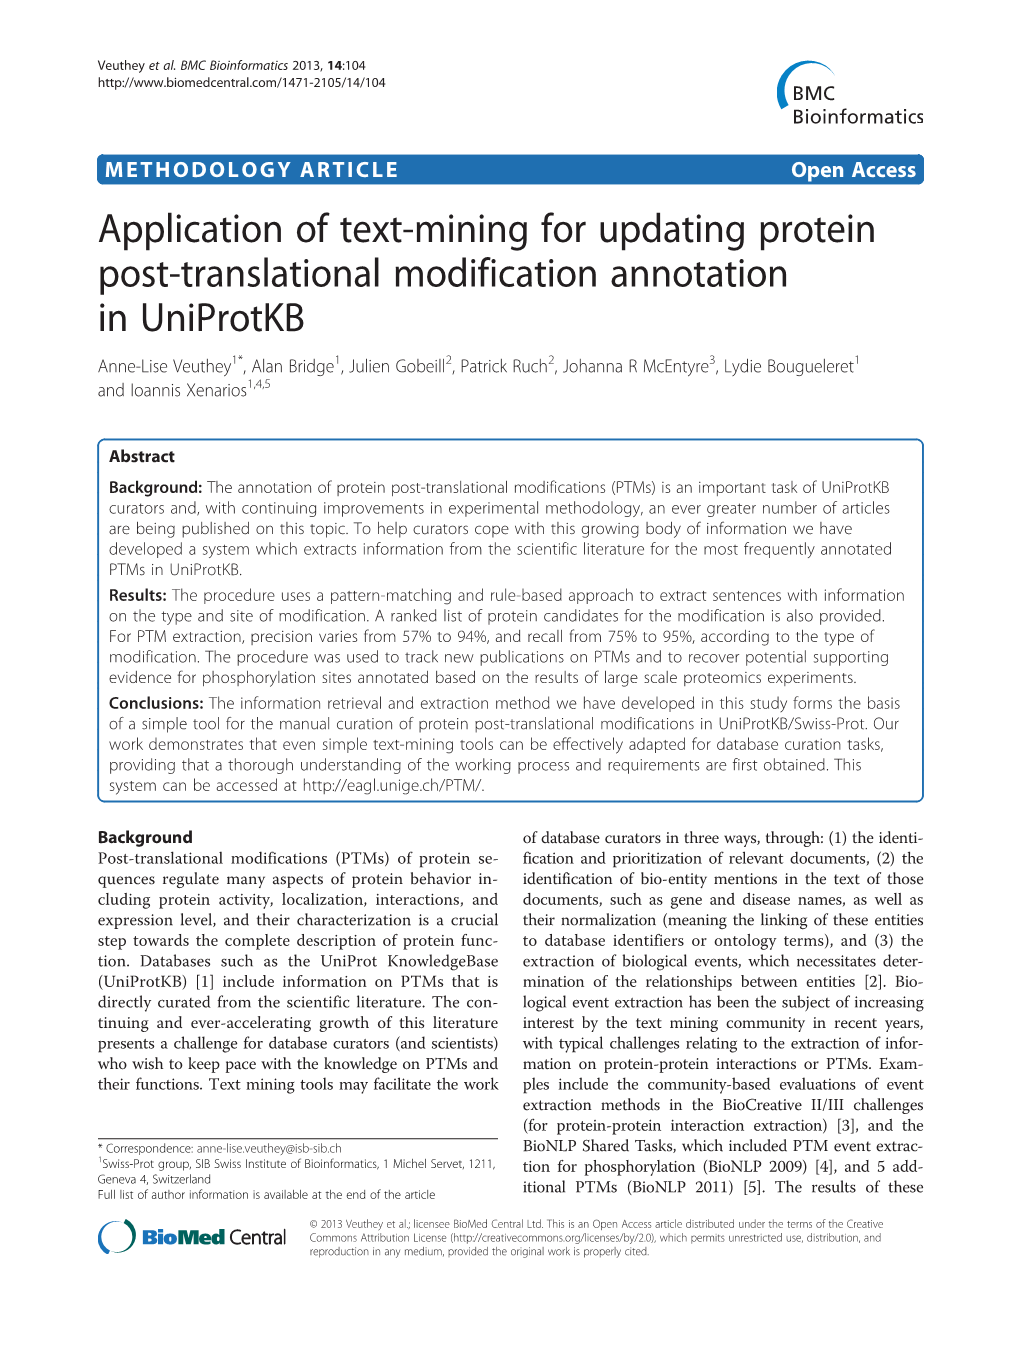 Application of Text-Mining for Updating Protein Post-Translational